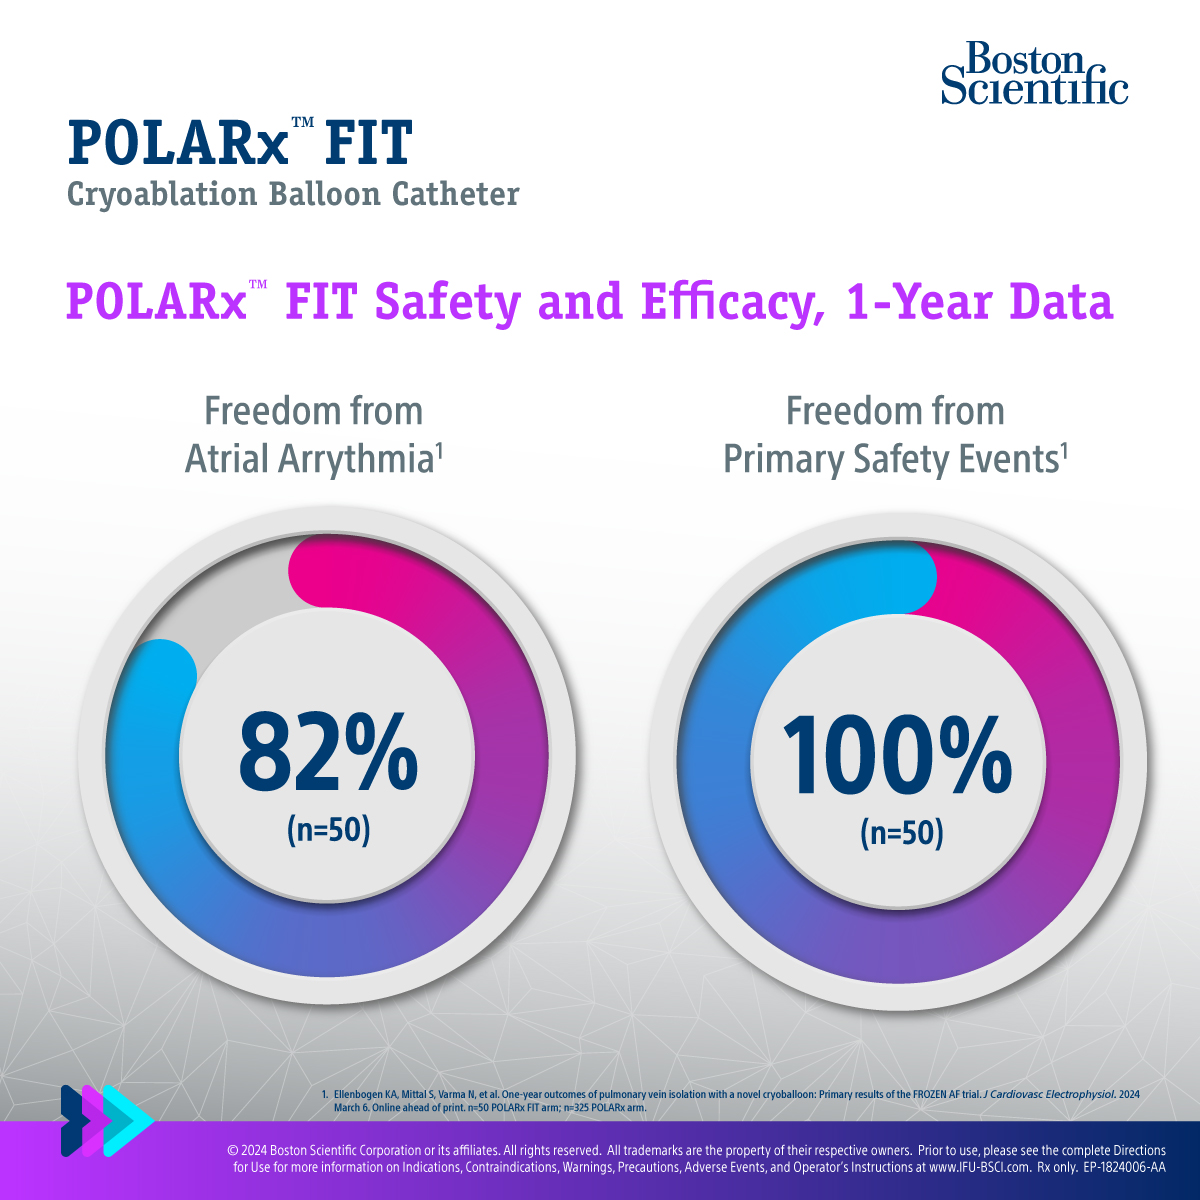 The 12-month clinical data on POLARx™ FIT is in! At one year, 100% of patients were free of any primary safety event. See the FROzEN AF trial findings: bit.ly/4auPglc Safety info: bit.ly/3TKNfu8